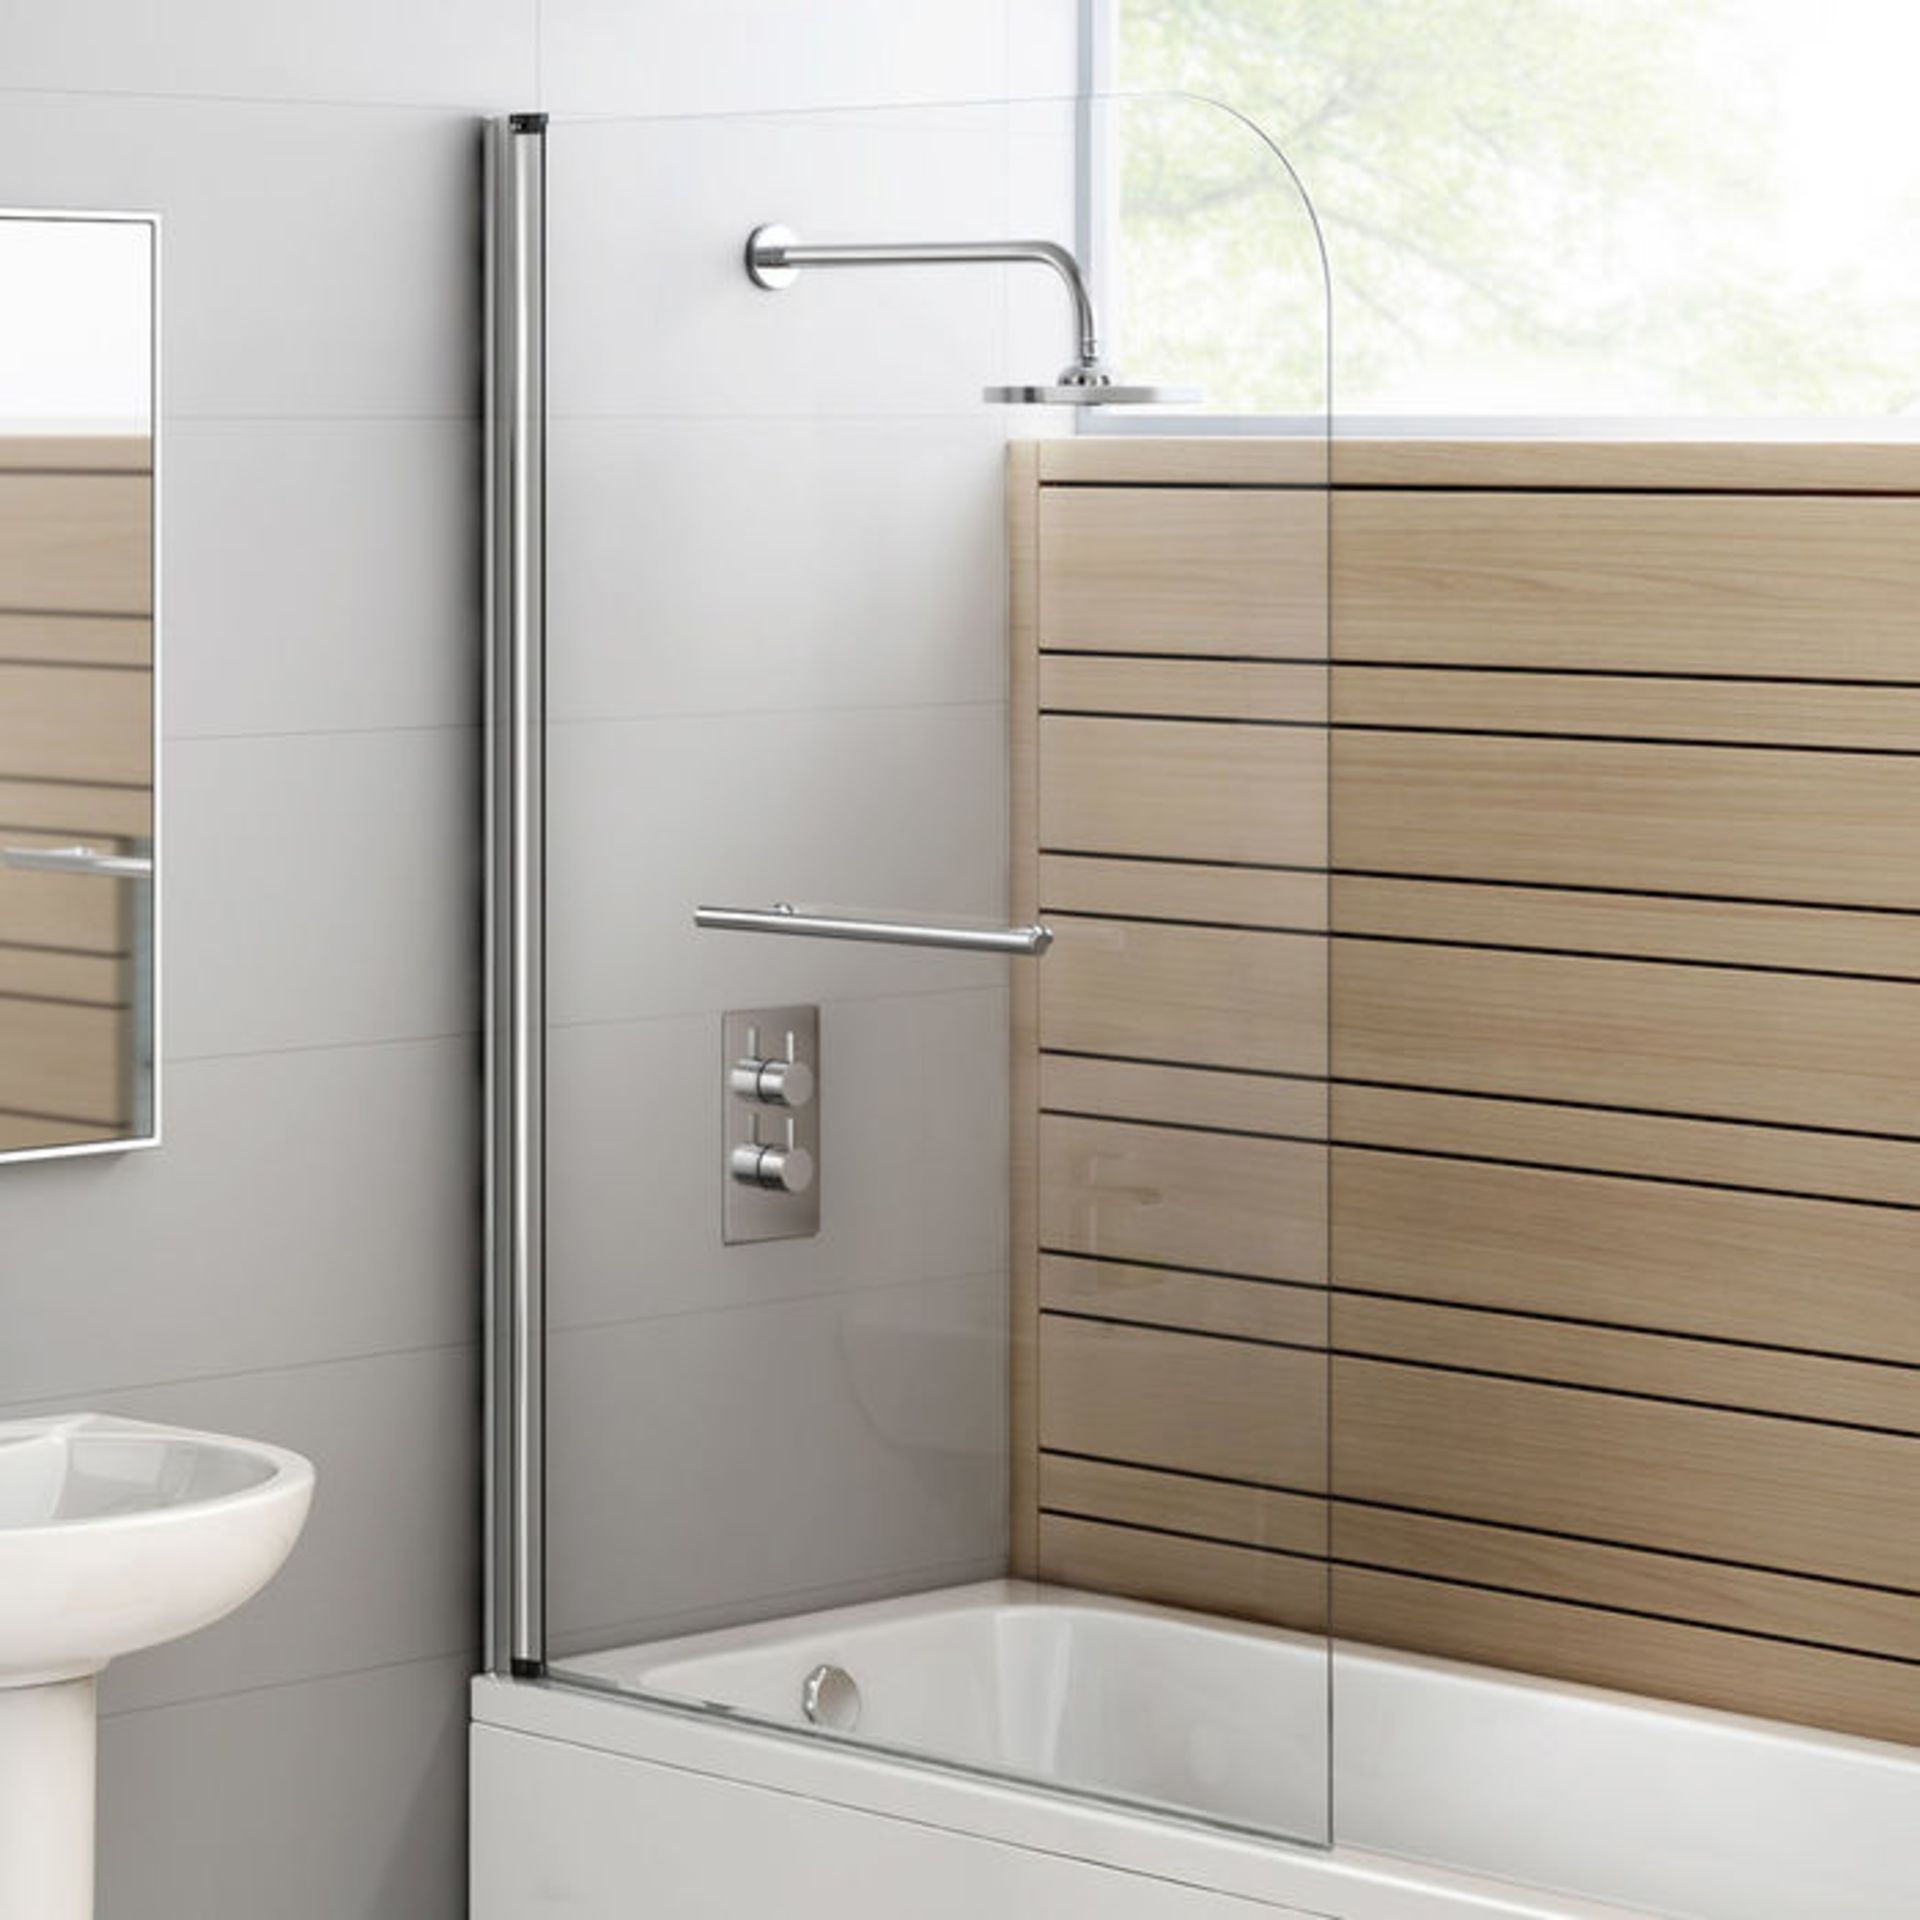 (TA32) 1000mm - 4mm - Straight Bath Screen & Towel Rail. RRP £174.99. A great addition to your